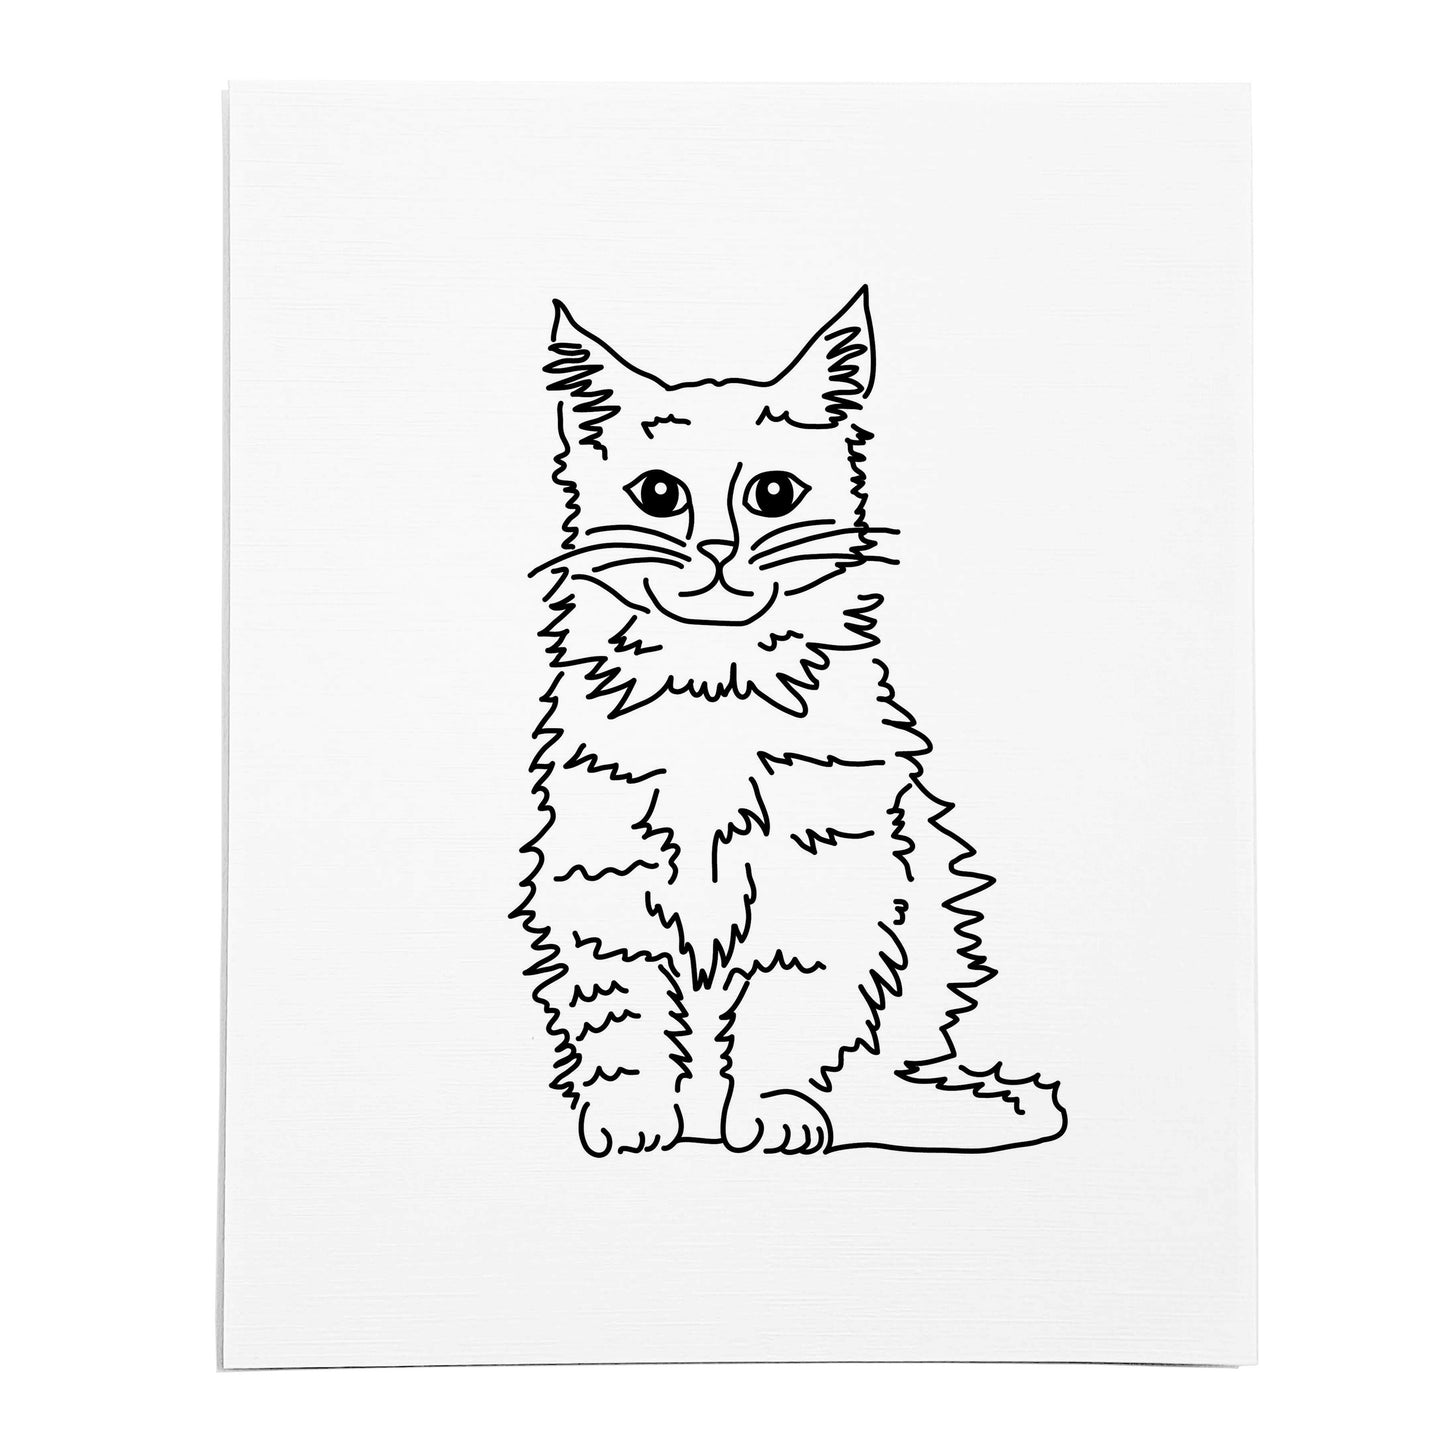 An art print featuring a line drawing of a Maine Coon cat on white linen paper